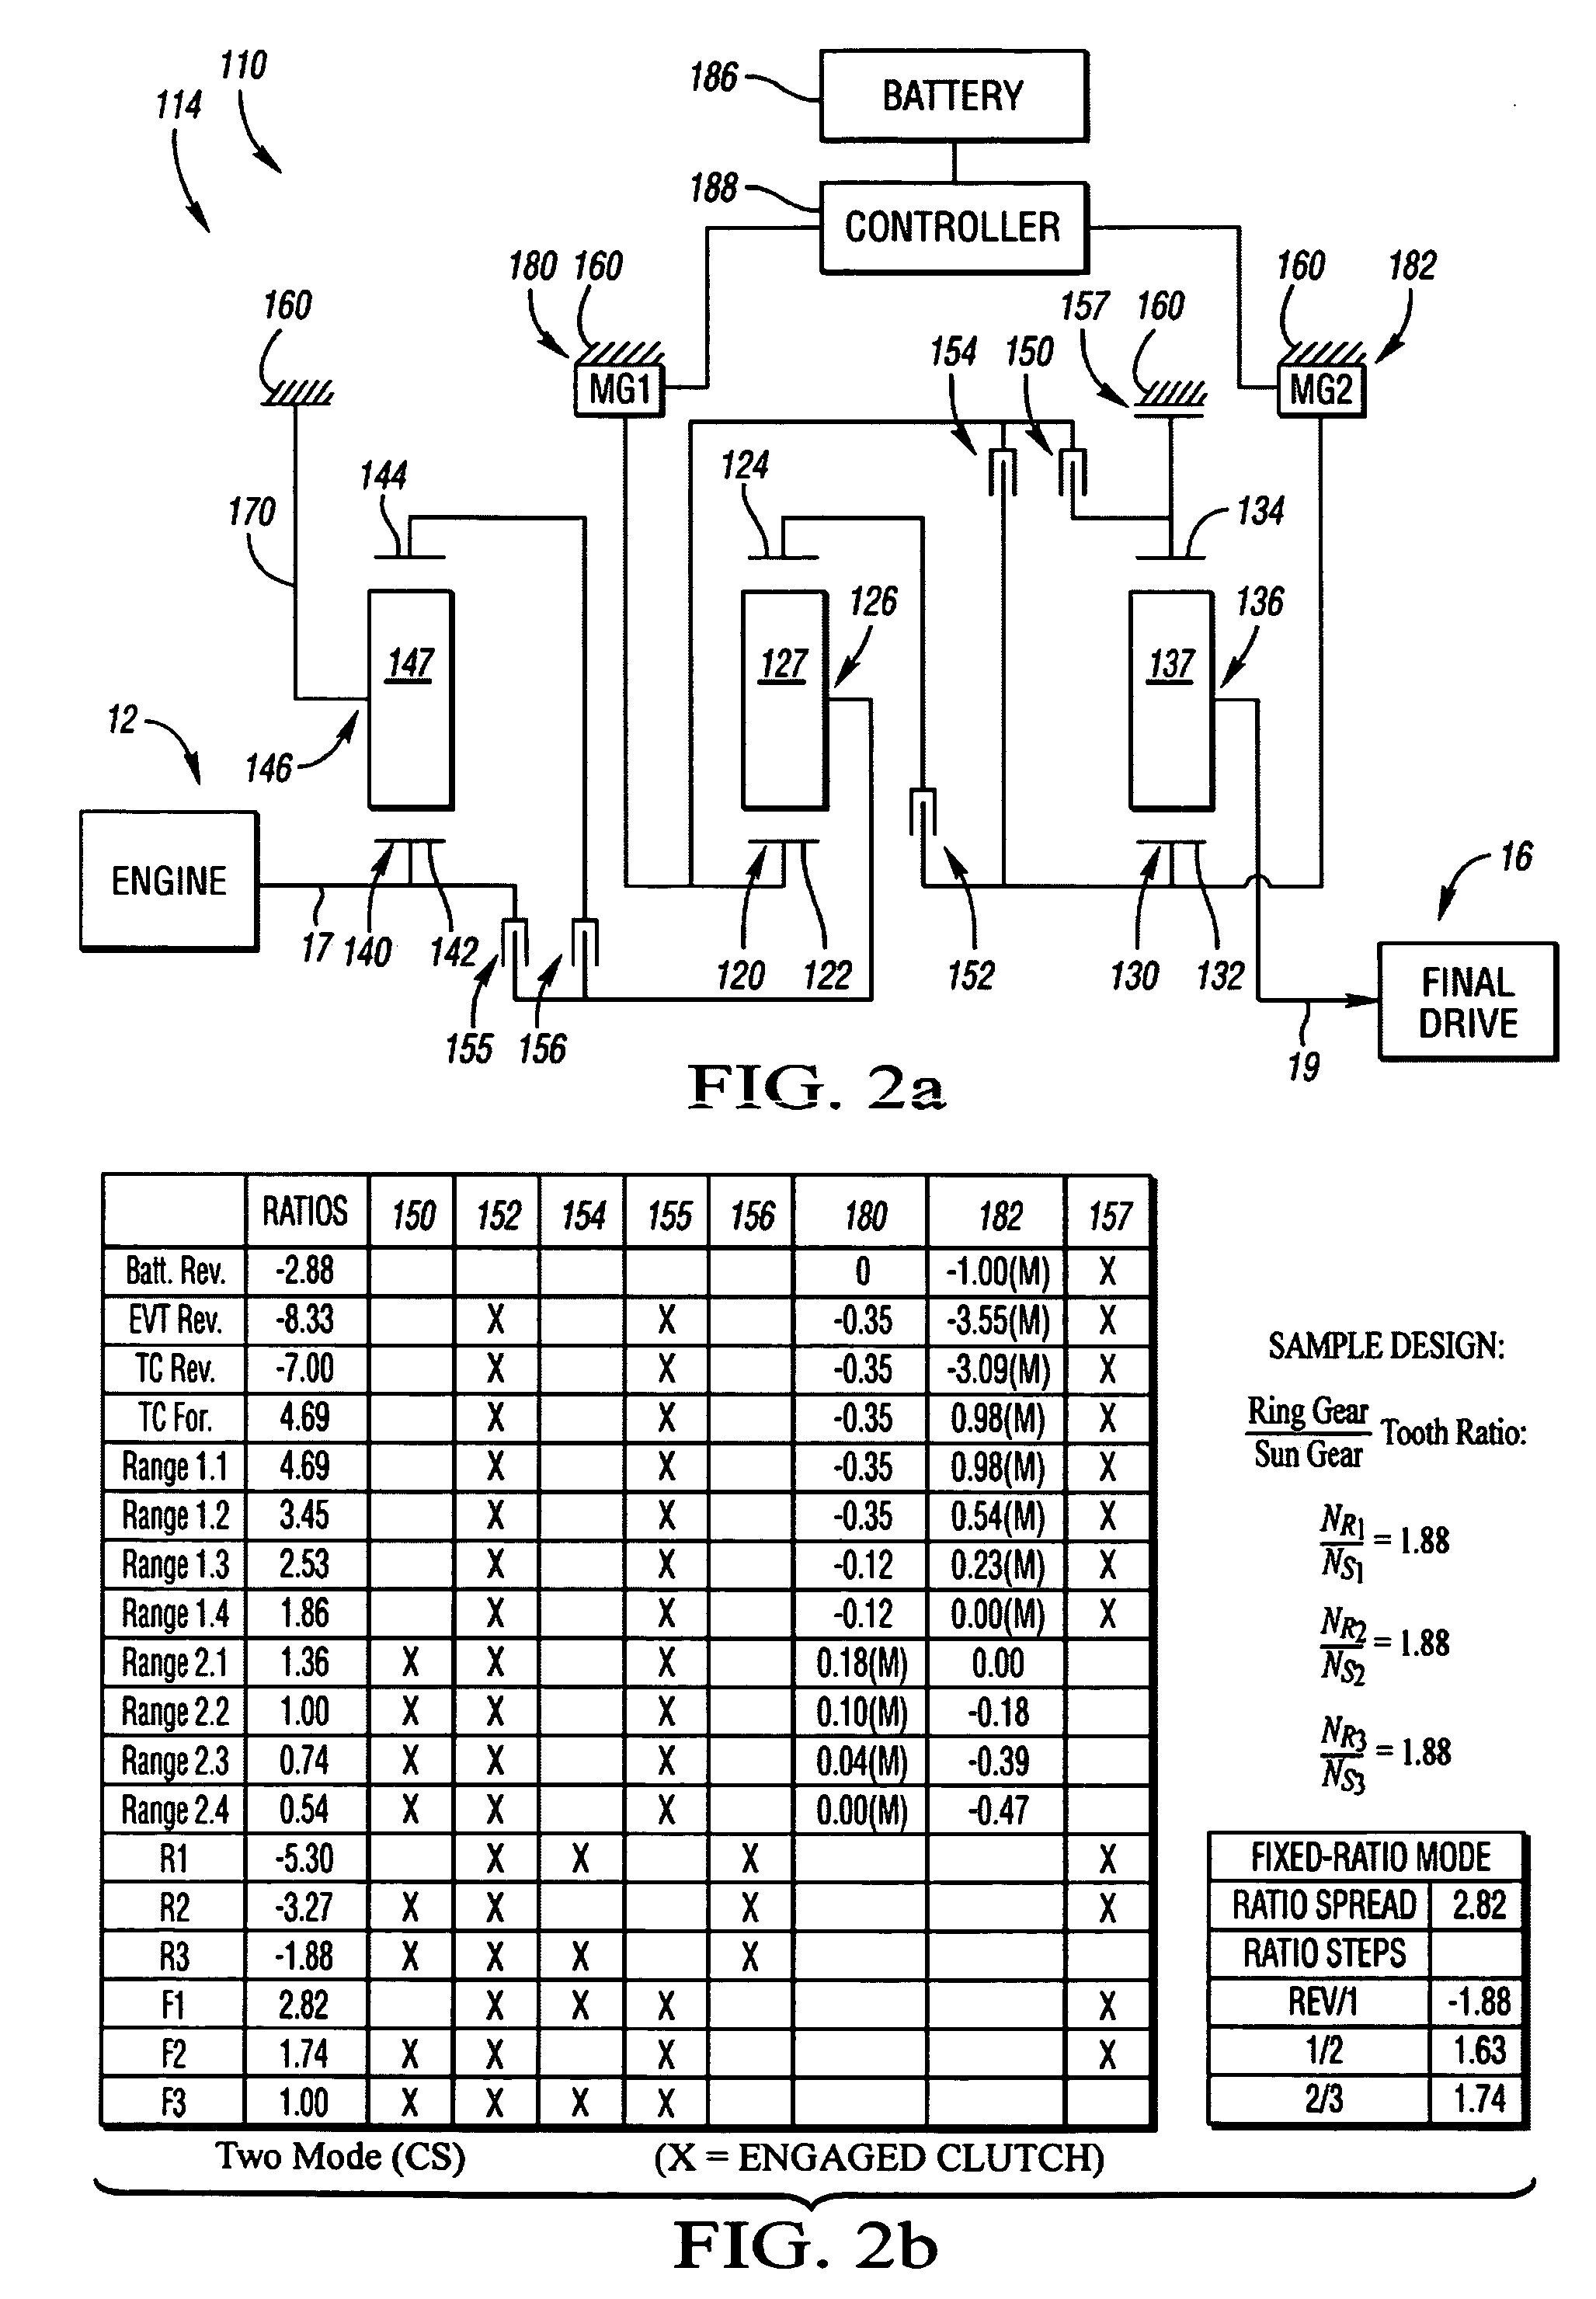 Electrically variable transmission having at least three planetary gear sets and one fixed interconnection